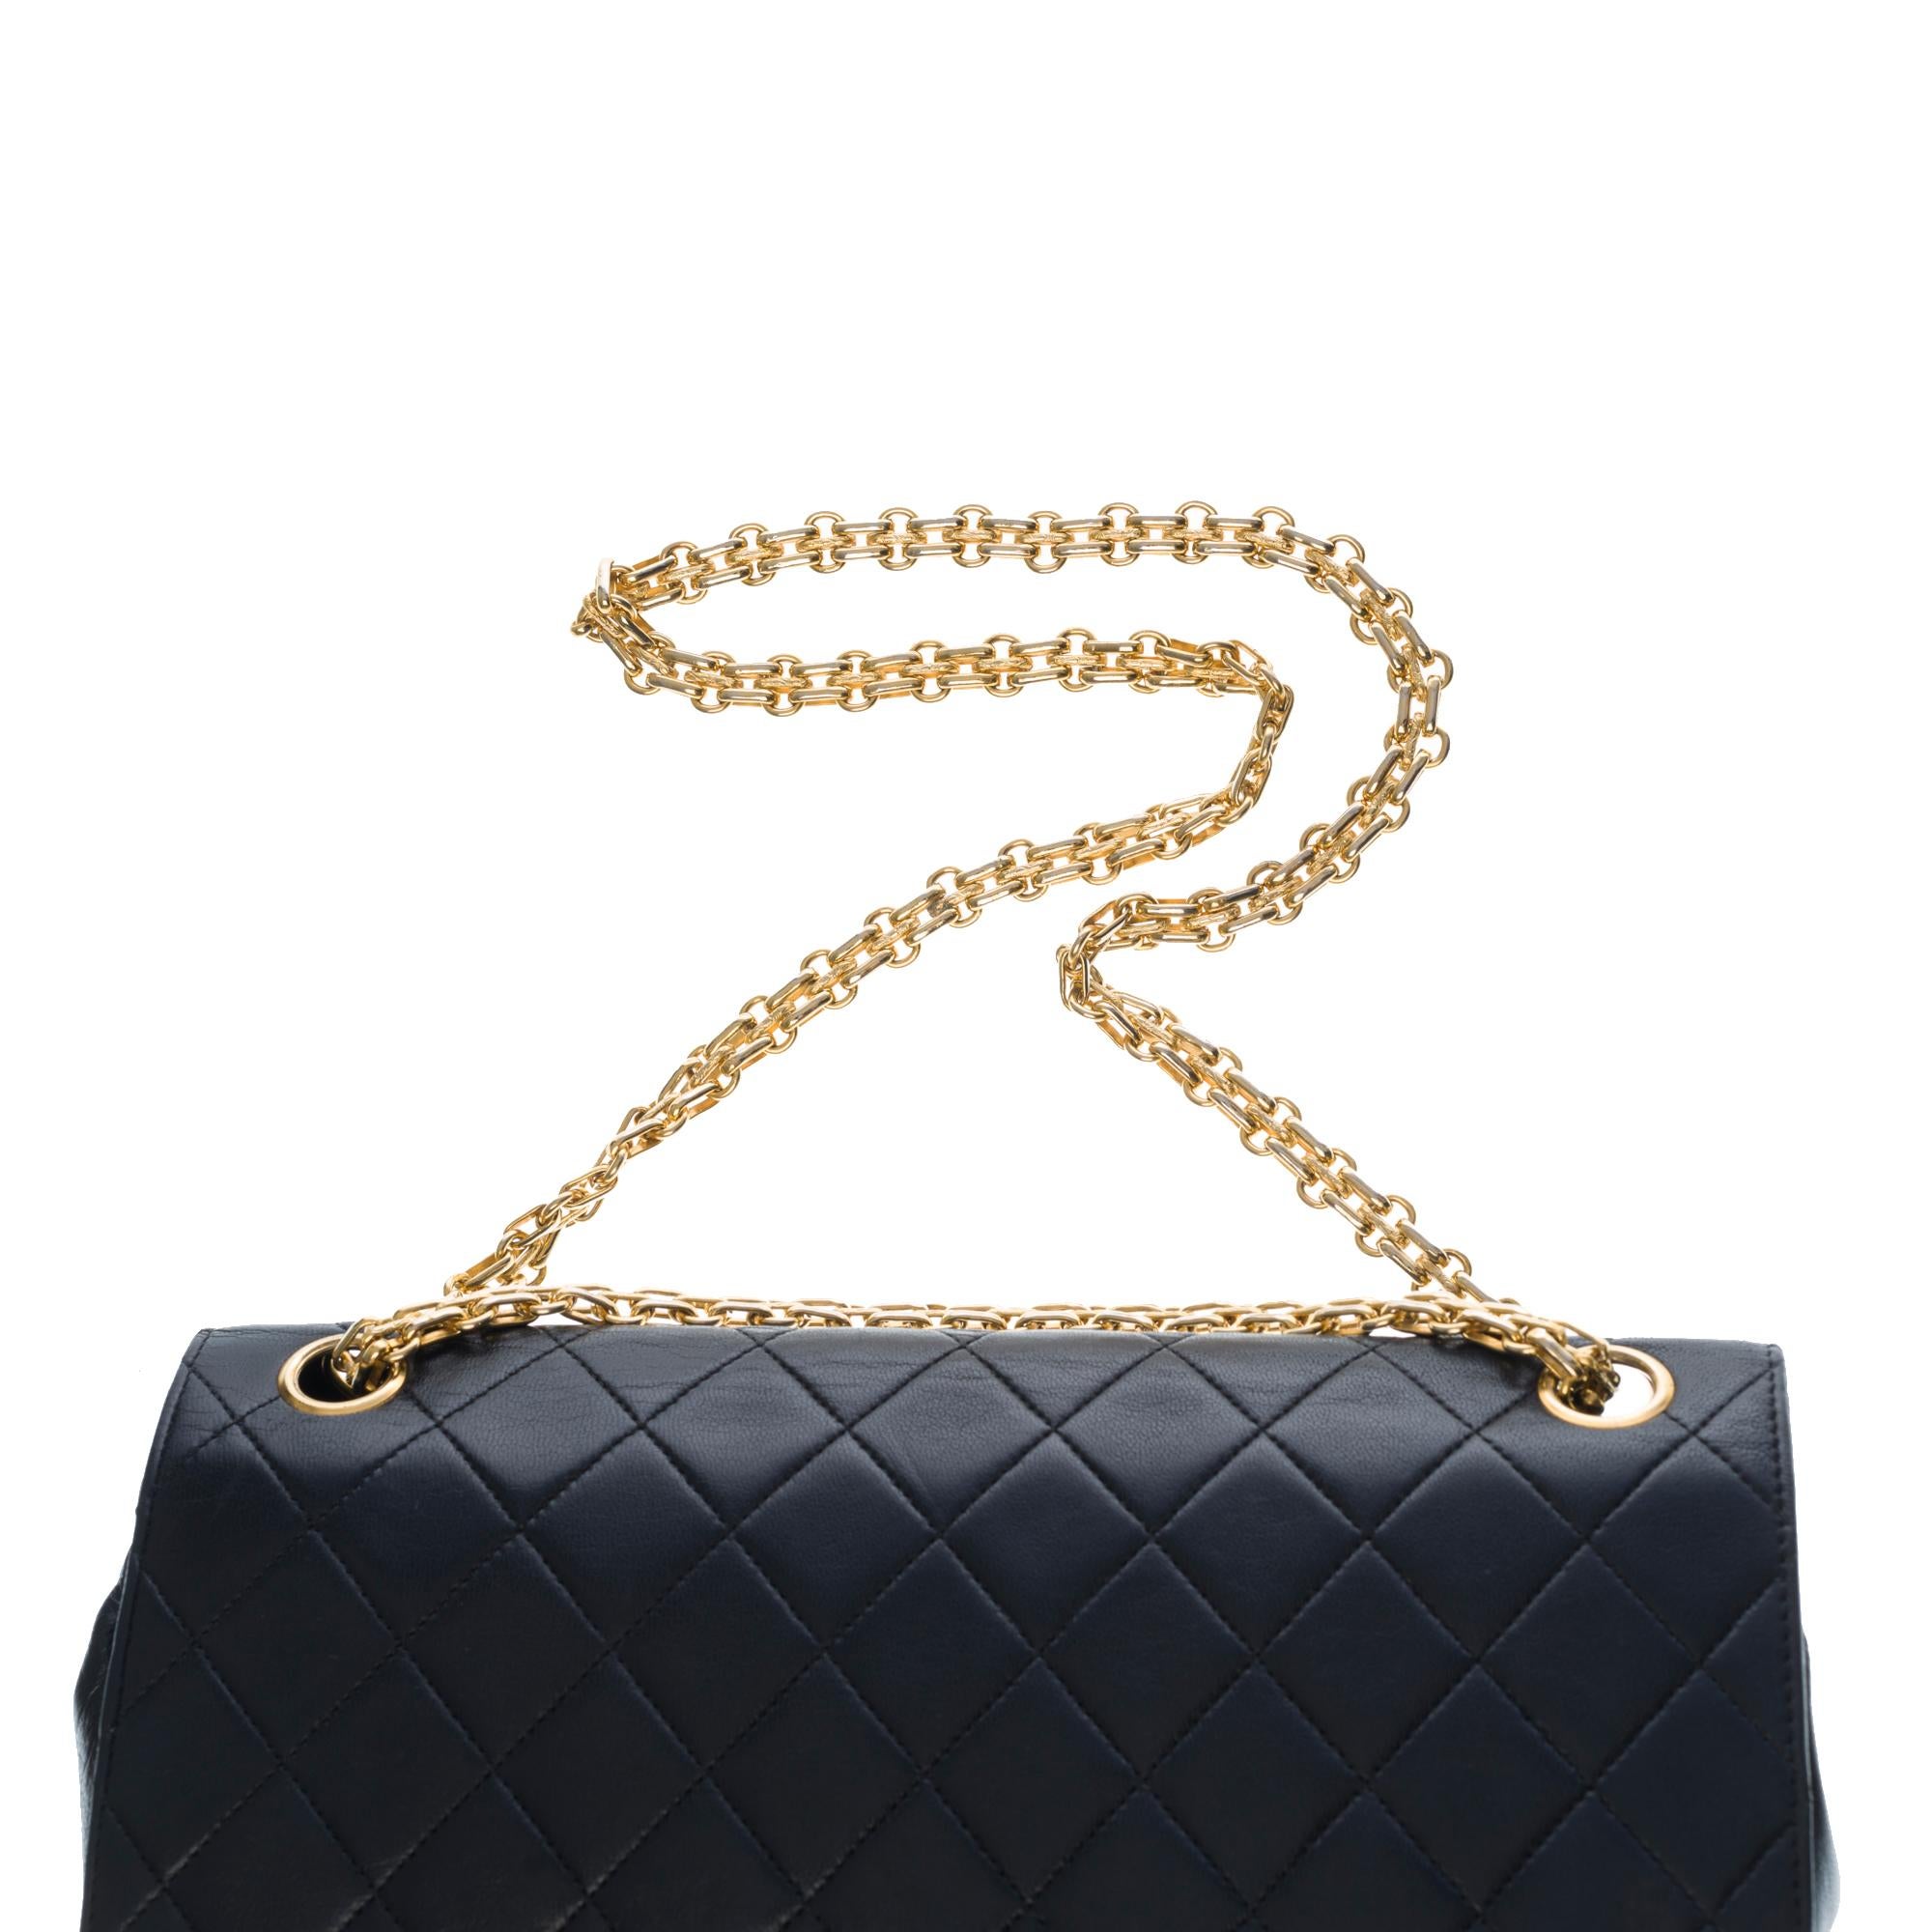 Chanel Timeless/Classic double Flap shoulder bag in black quilted lambskin, GHW 1